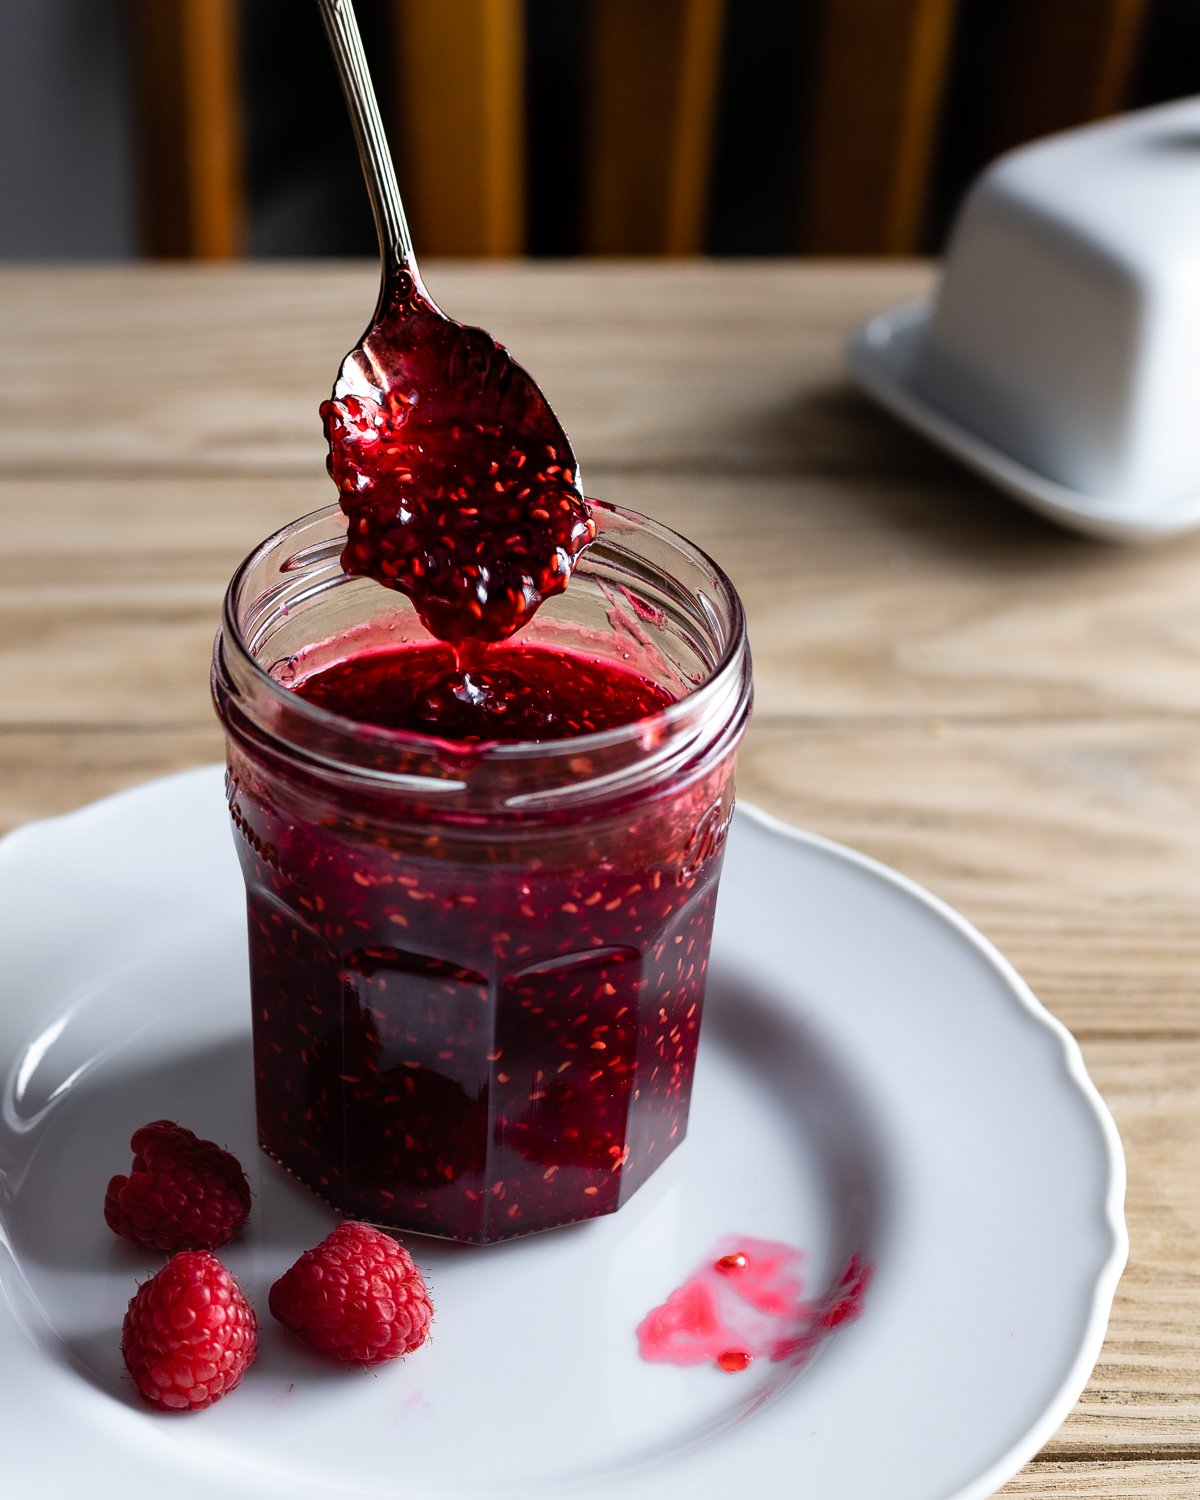 spoon scooping chunky raspberry preserves in a jar on a plate.